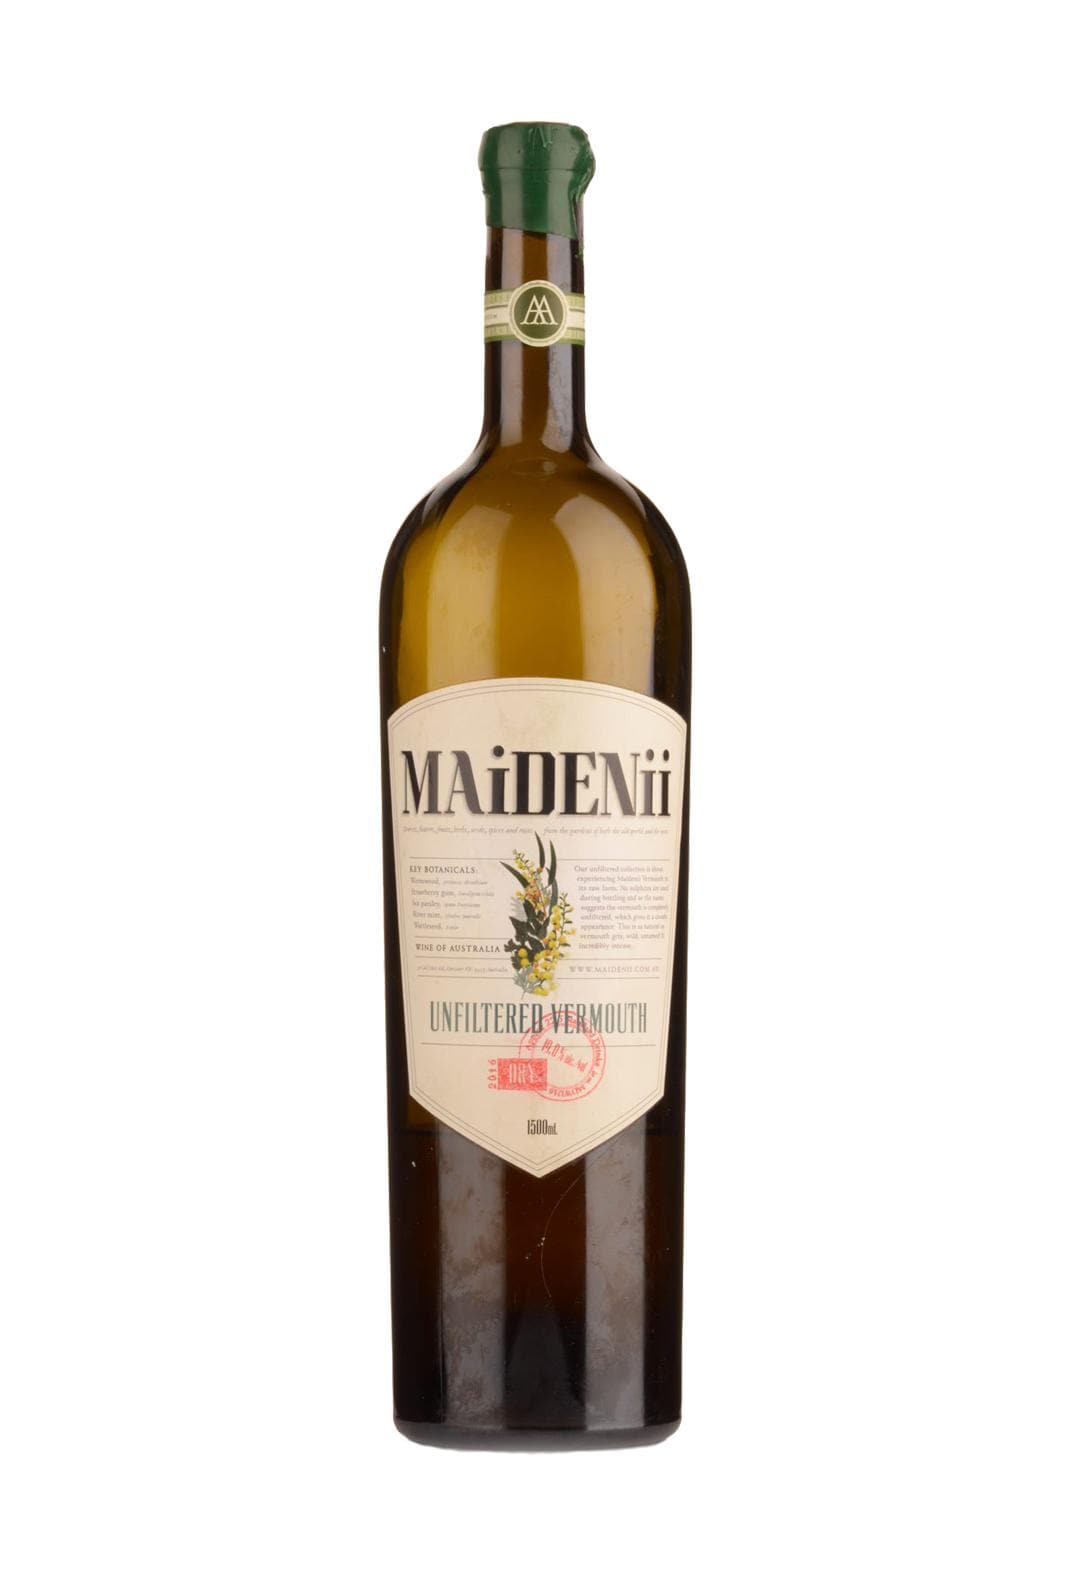 Maidenii Dry Vermouth 2016 Unfiltered 17.5% 1500ml | Liquor & Spirits | Shop online at Spirits of France